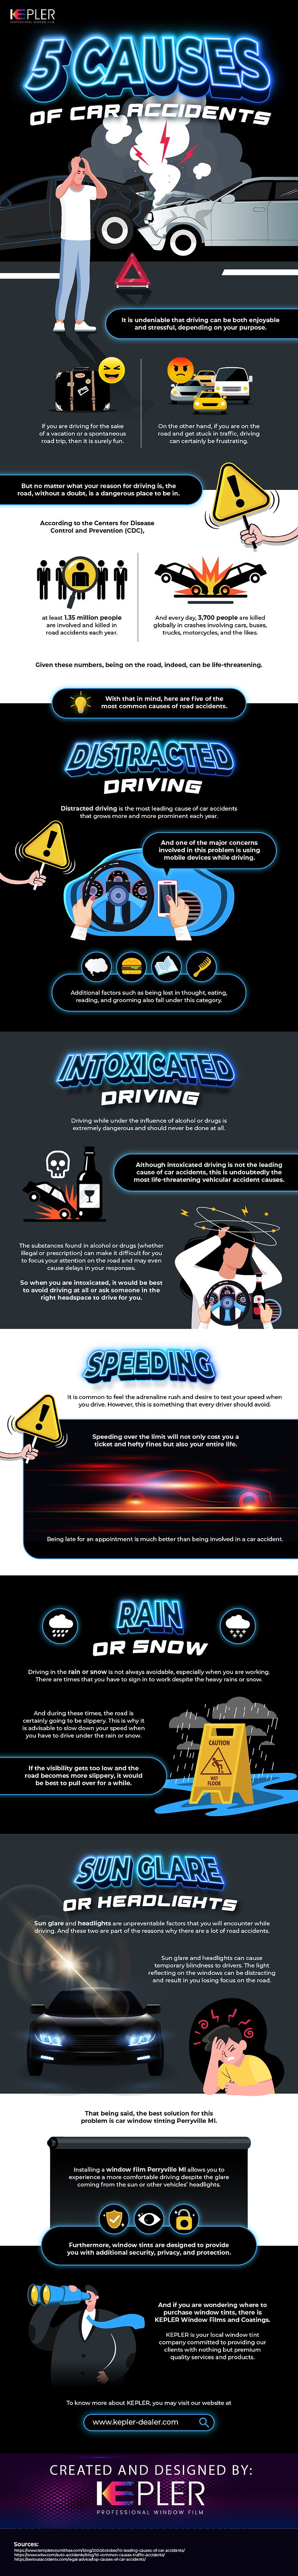 5 Causes Of Car Accidents - Infographic